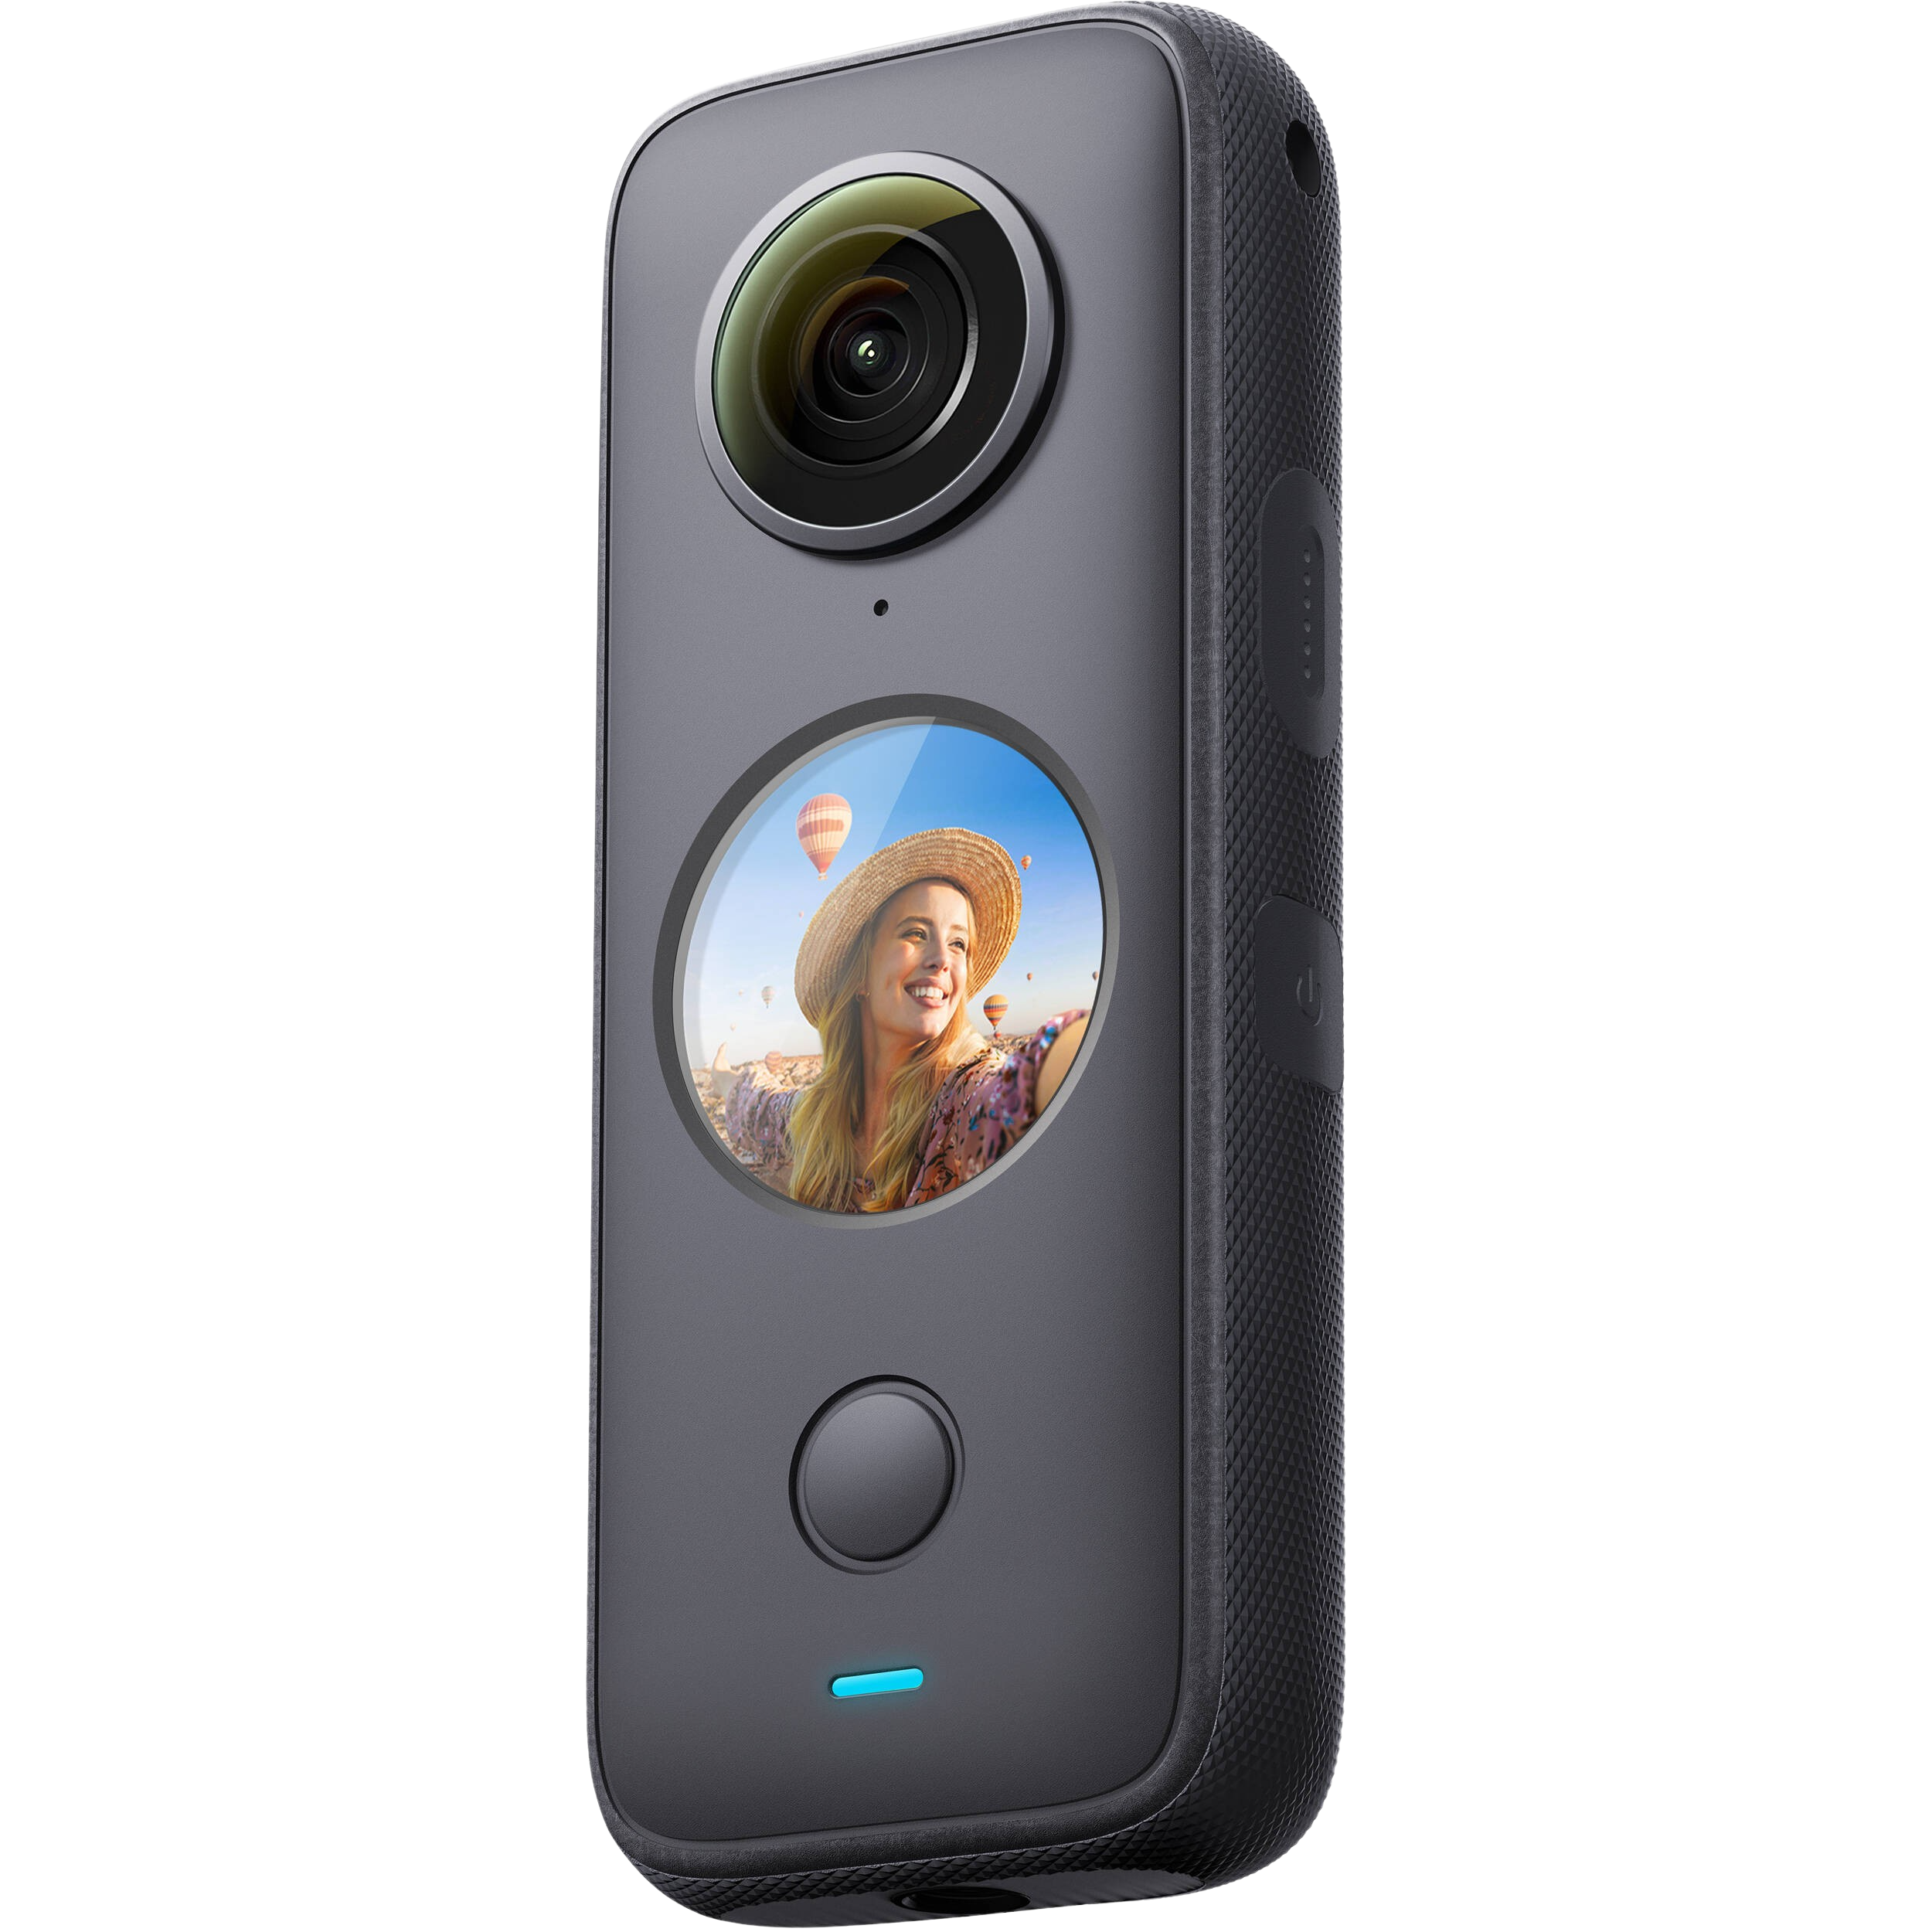 Rent Insta360 One X2 Action camera from €21.90 per month